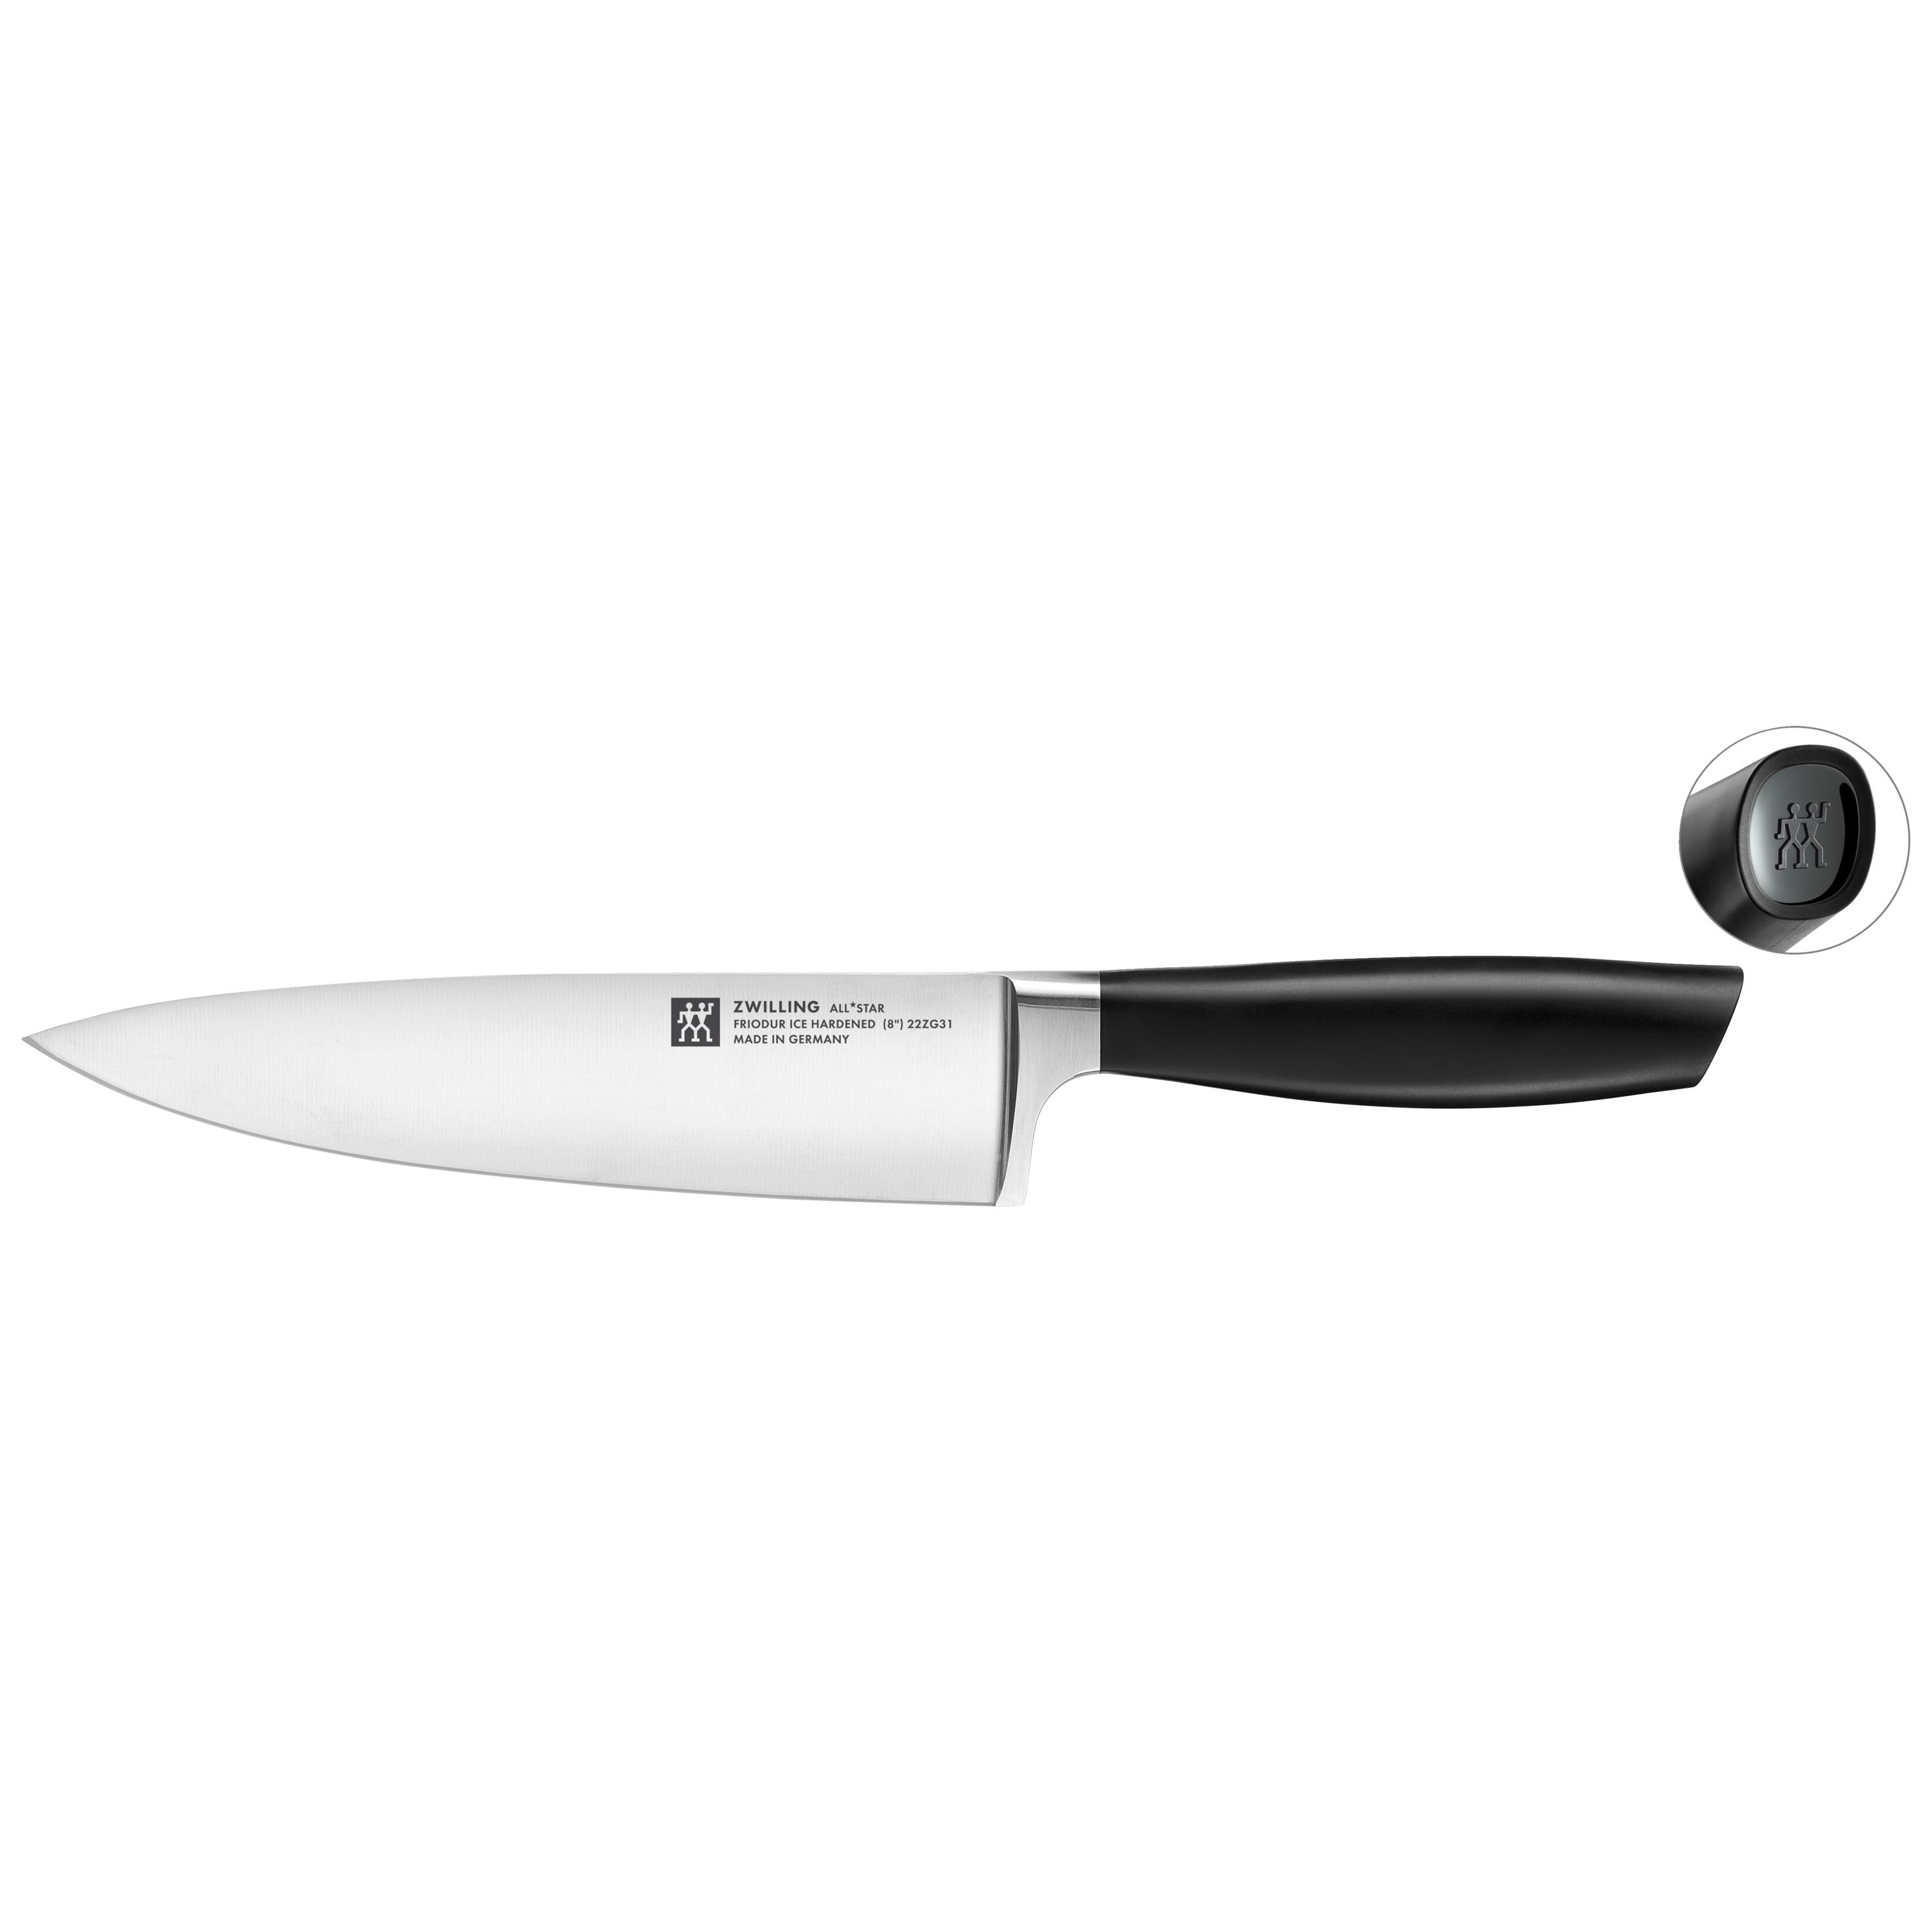 ZWILLING USA (@zwilling_usa) • Instagram photos and videos